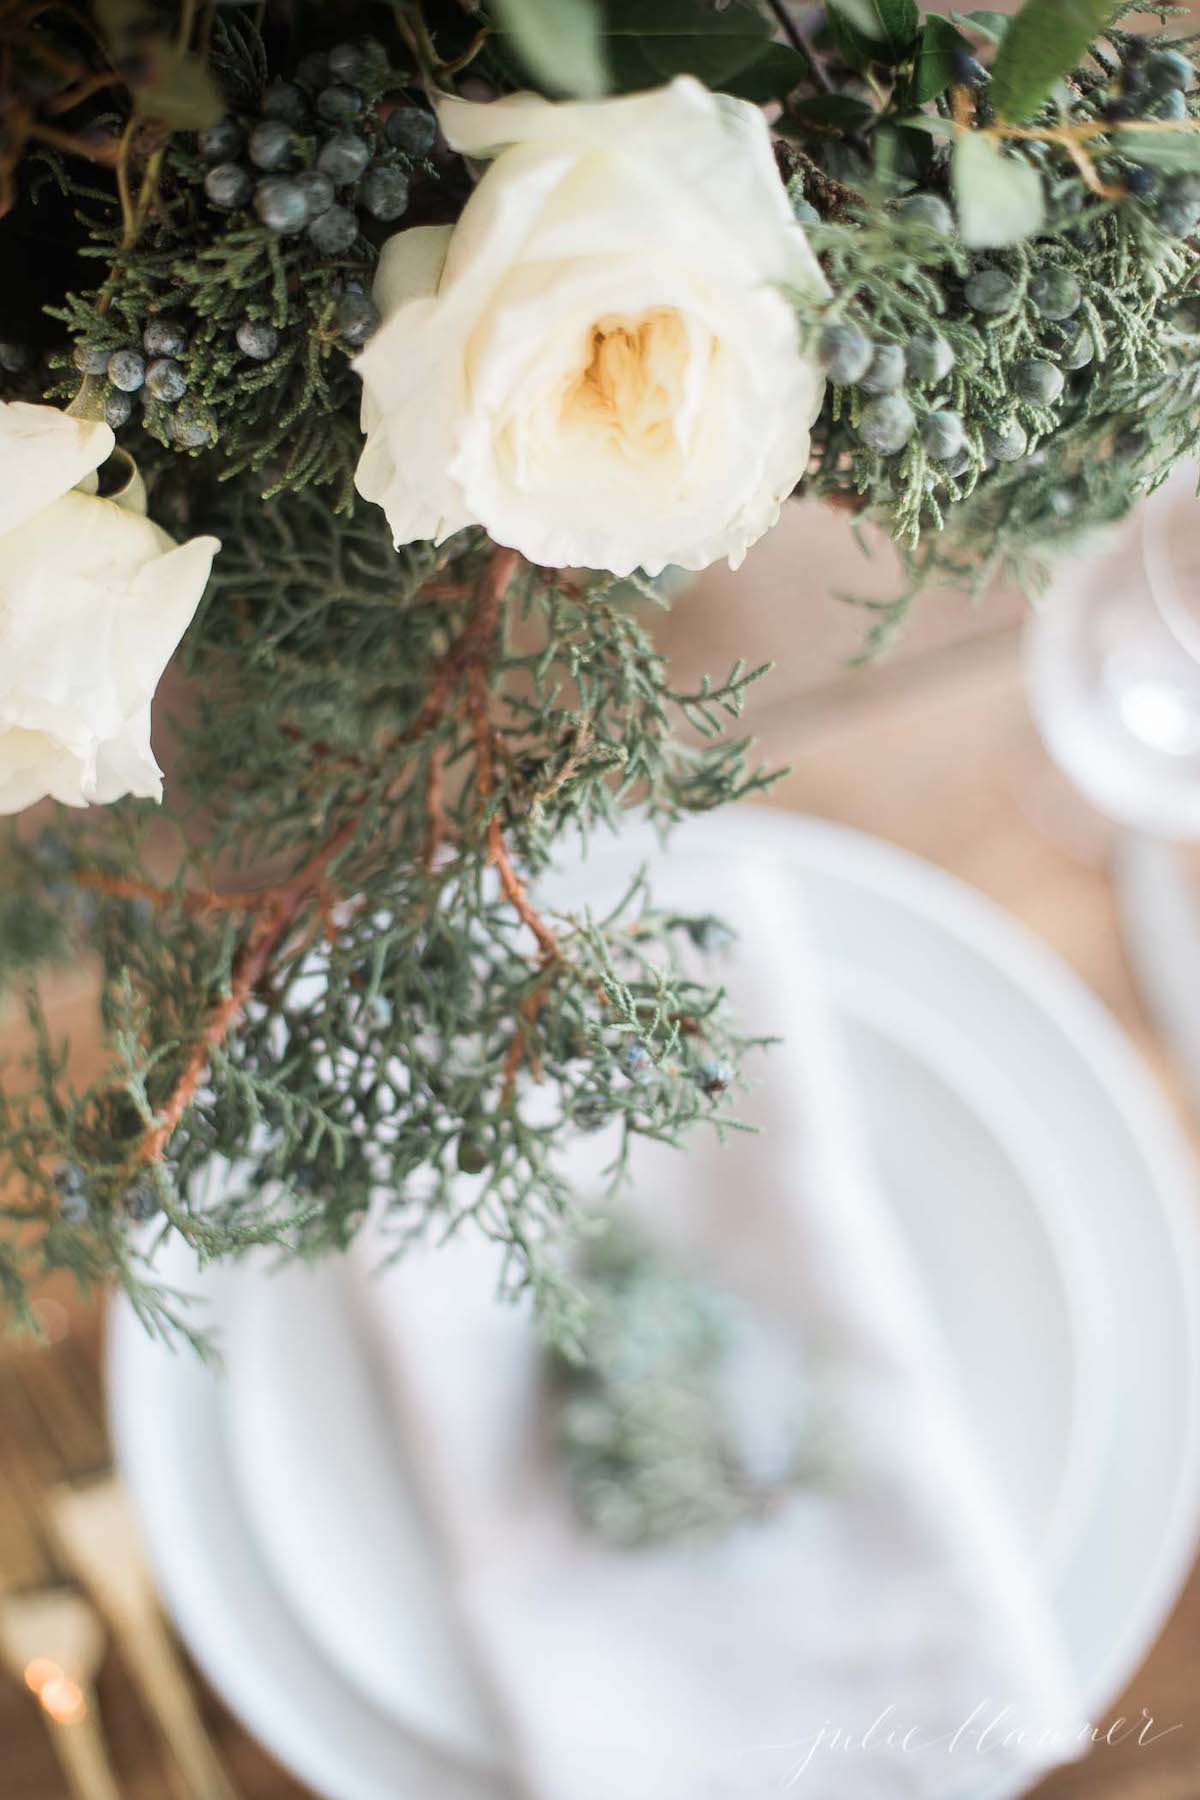 A table setting with white roses and greenery.